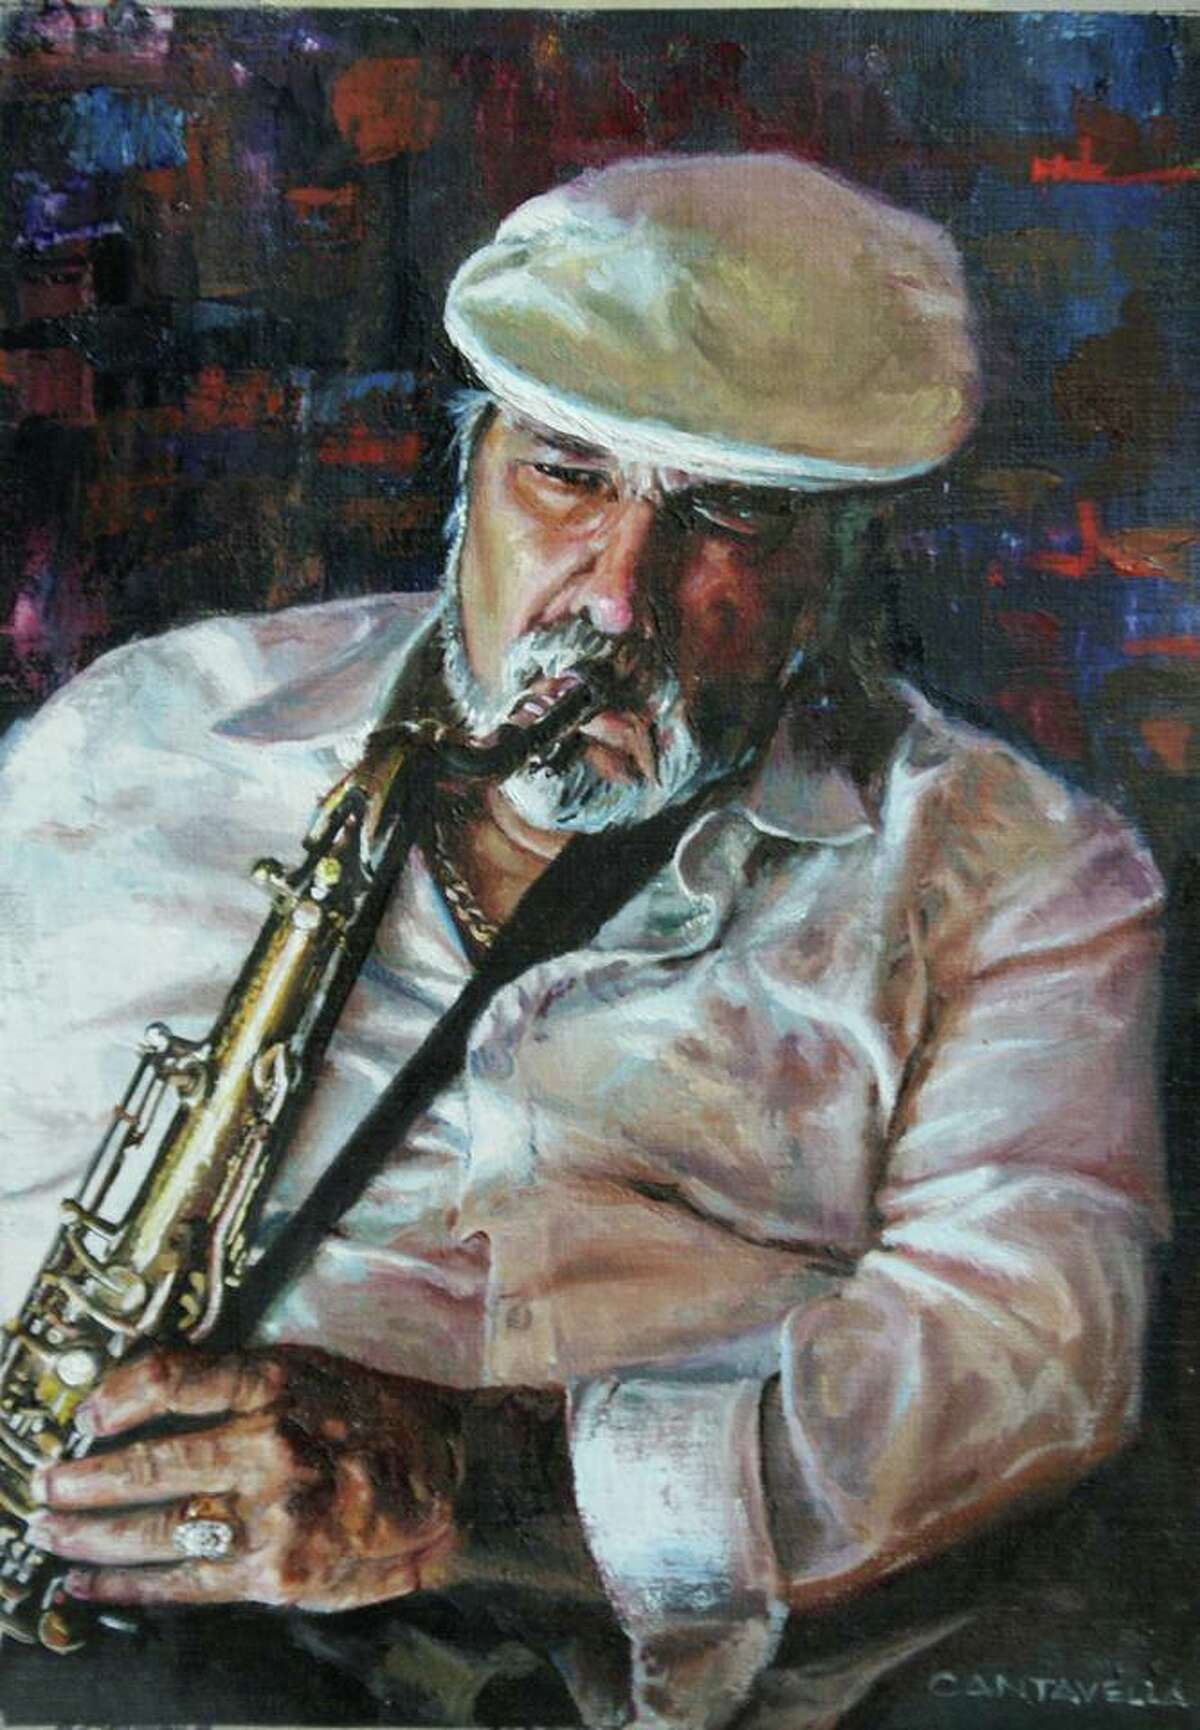 An oil painting titled "Jazz" by Juan Cantavella, a new art instructor at the Gallery at the Madeley Building.